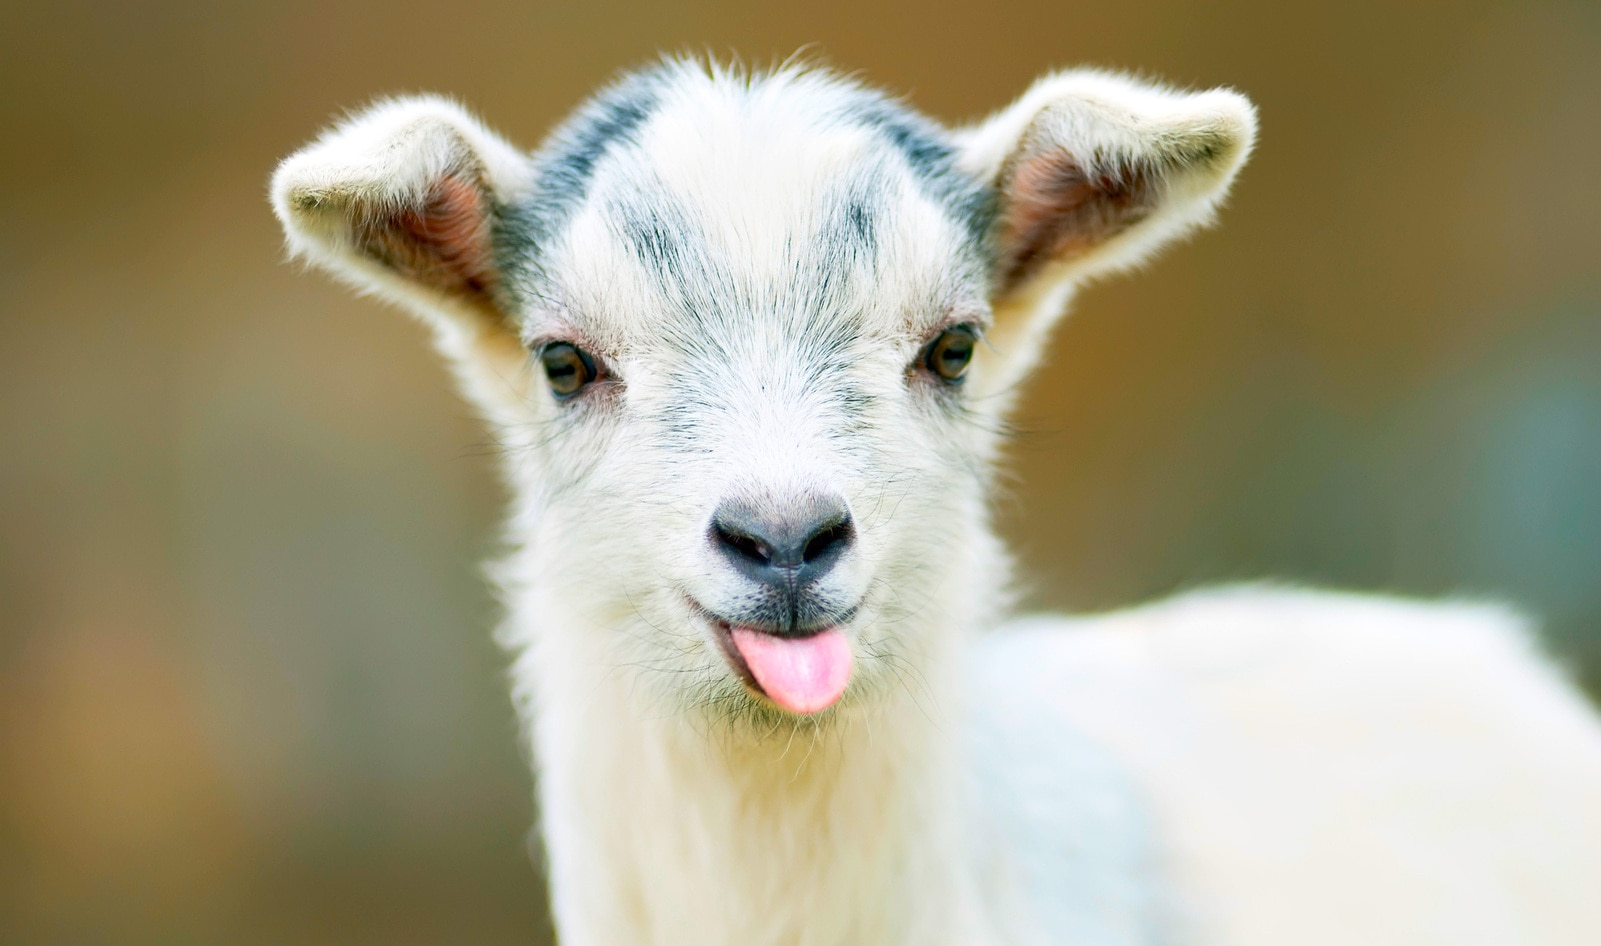 New Study Finds Goats Respond to Human Cues the Same Way Dogs Do